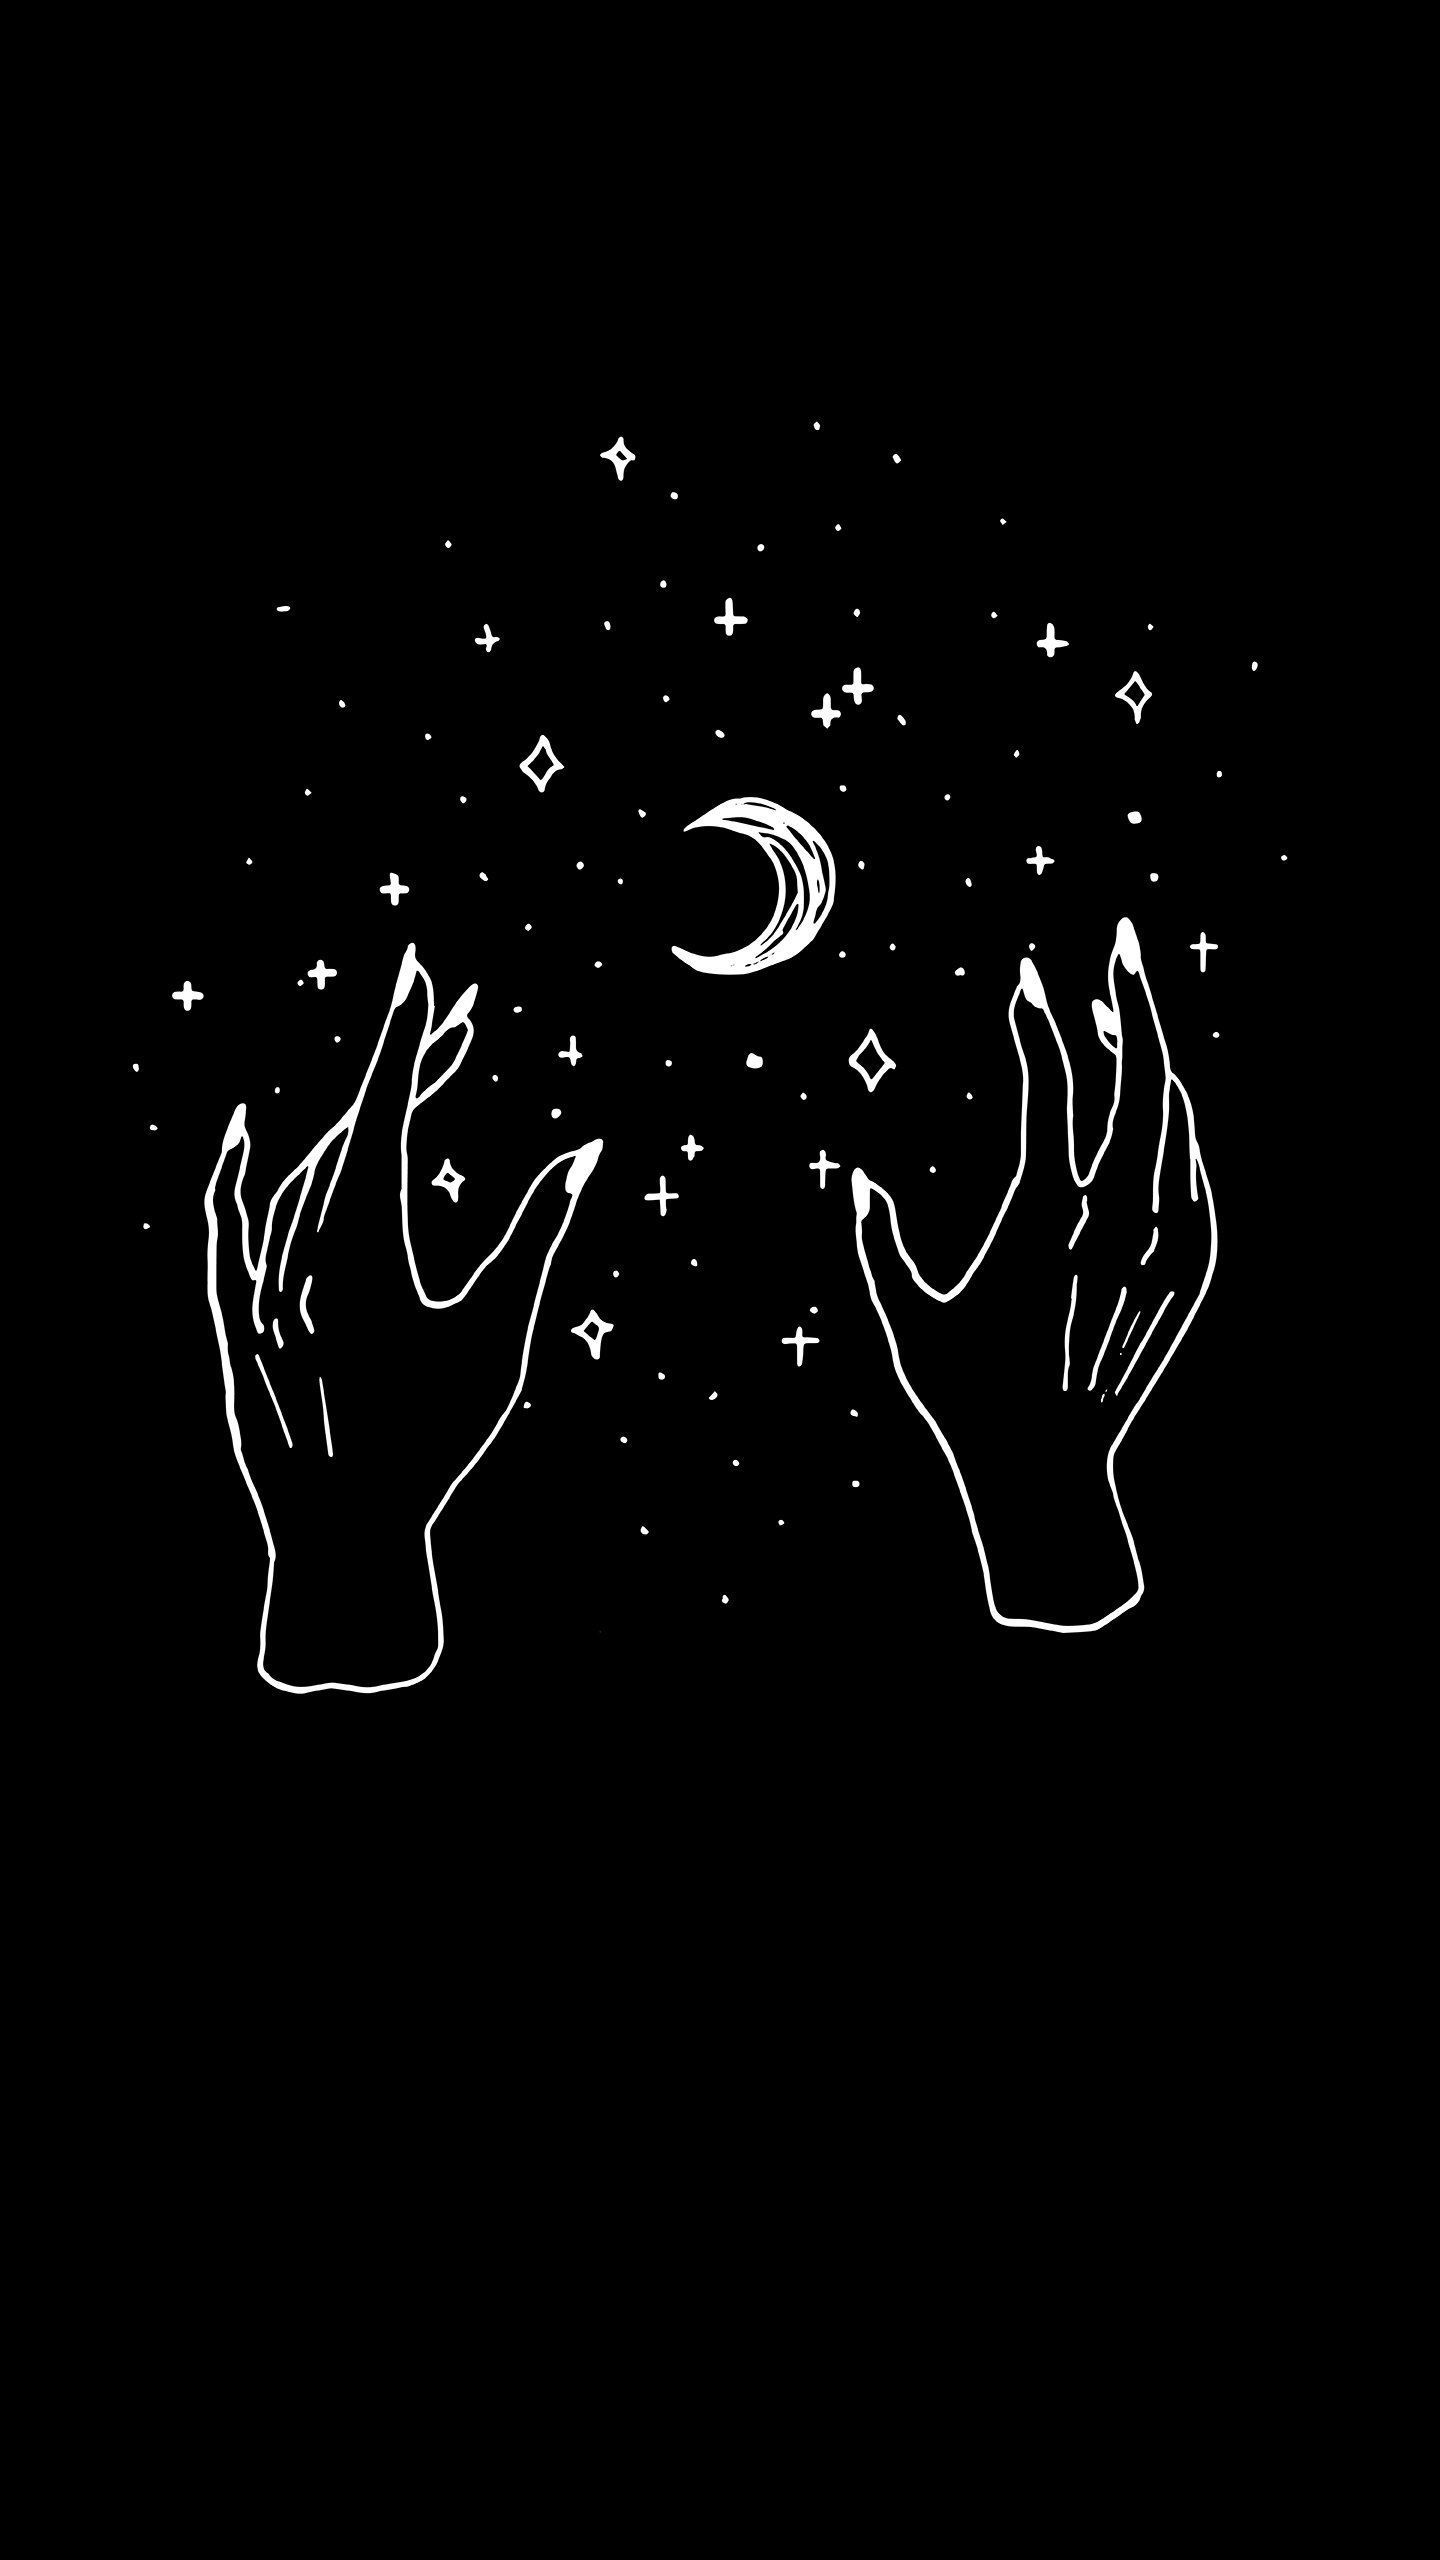 A hand drawing of two hands reaching for the stars - Witch, magic, witchcore